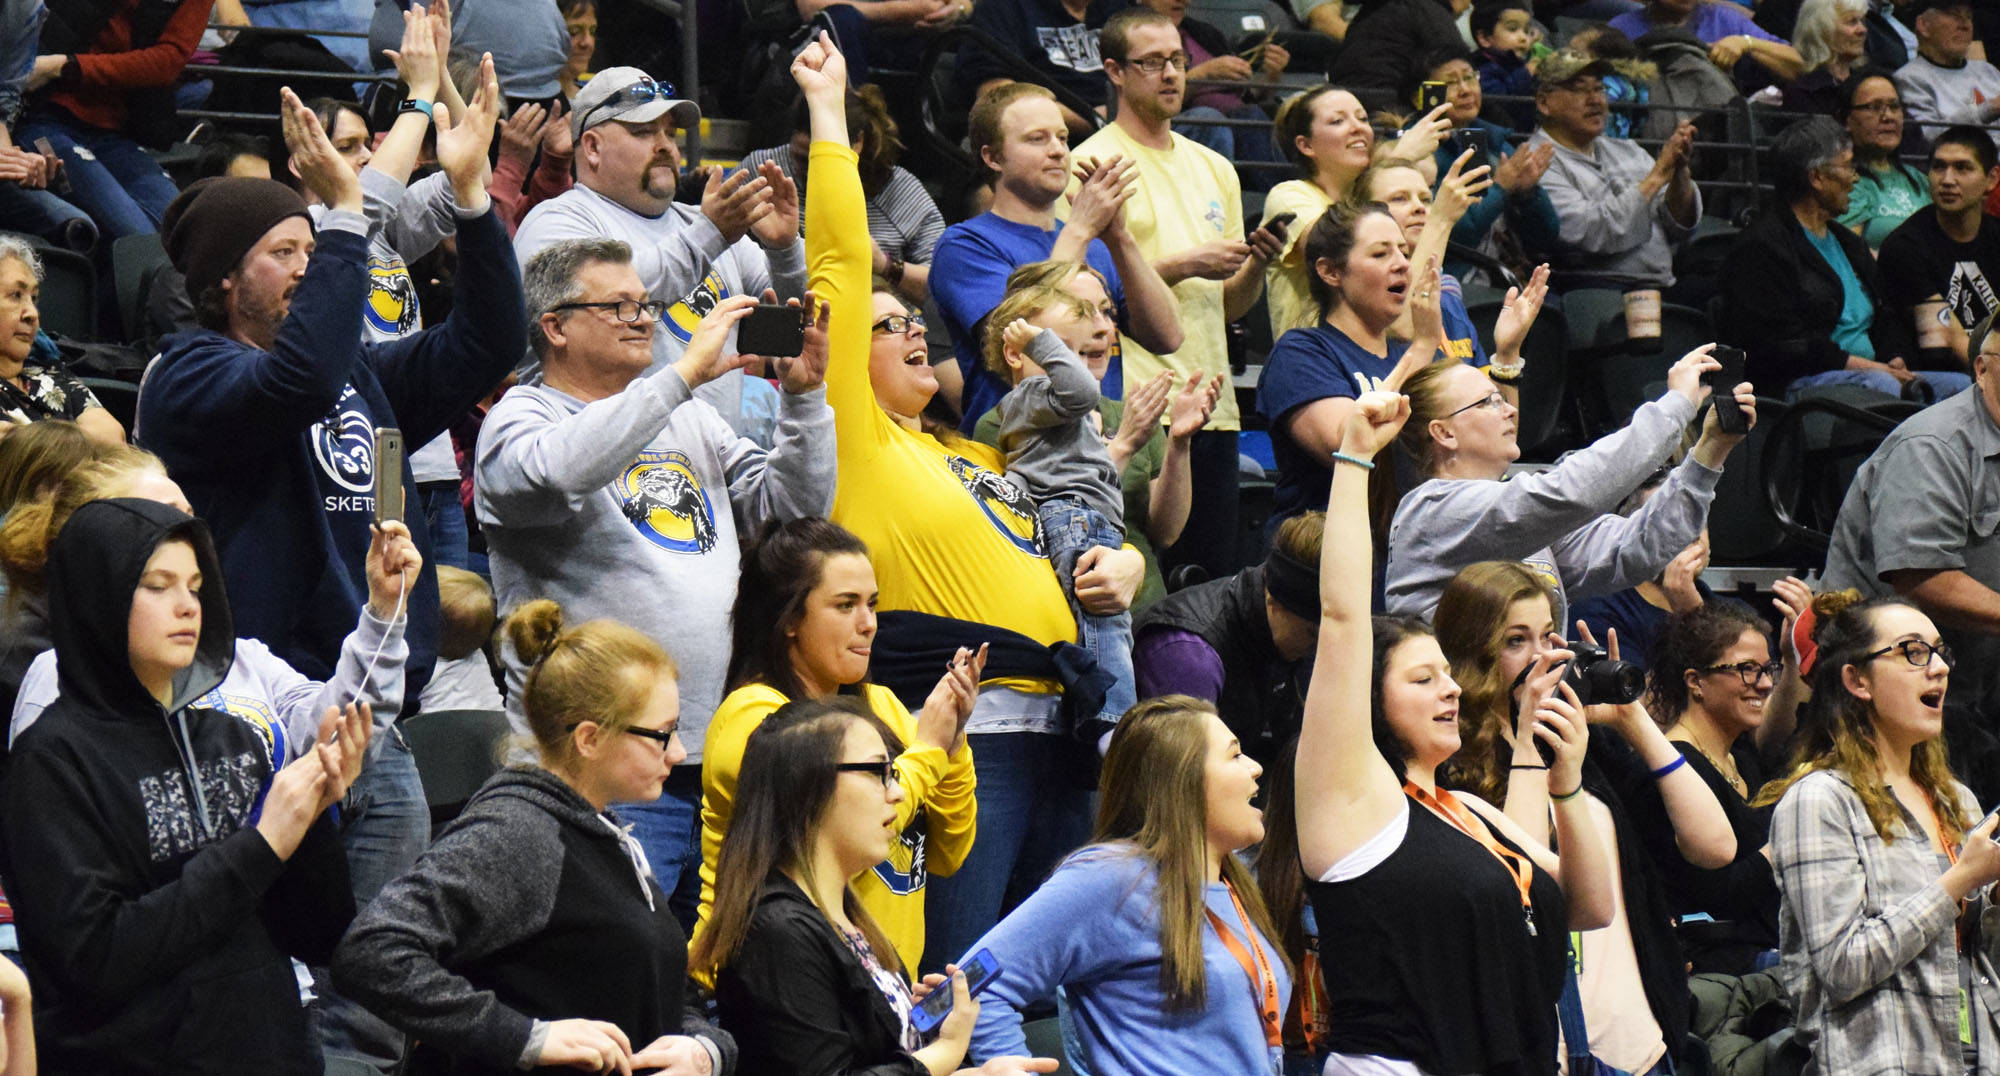 A crowd of Ninilchik supporters cheer on the Wolverines in the Class 1A boys state championship Saturday at the Alaska Airlines Center in Anchorage. (Photo by Joey Klecka/Peninsula Clarion)